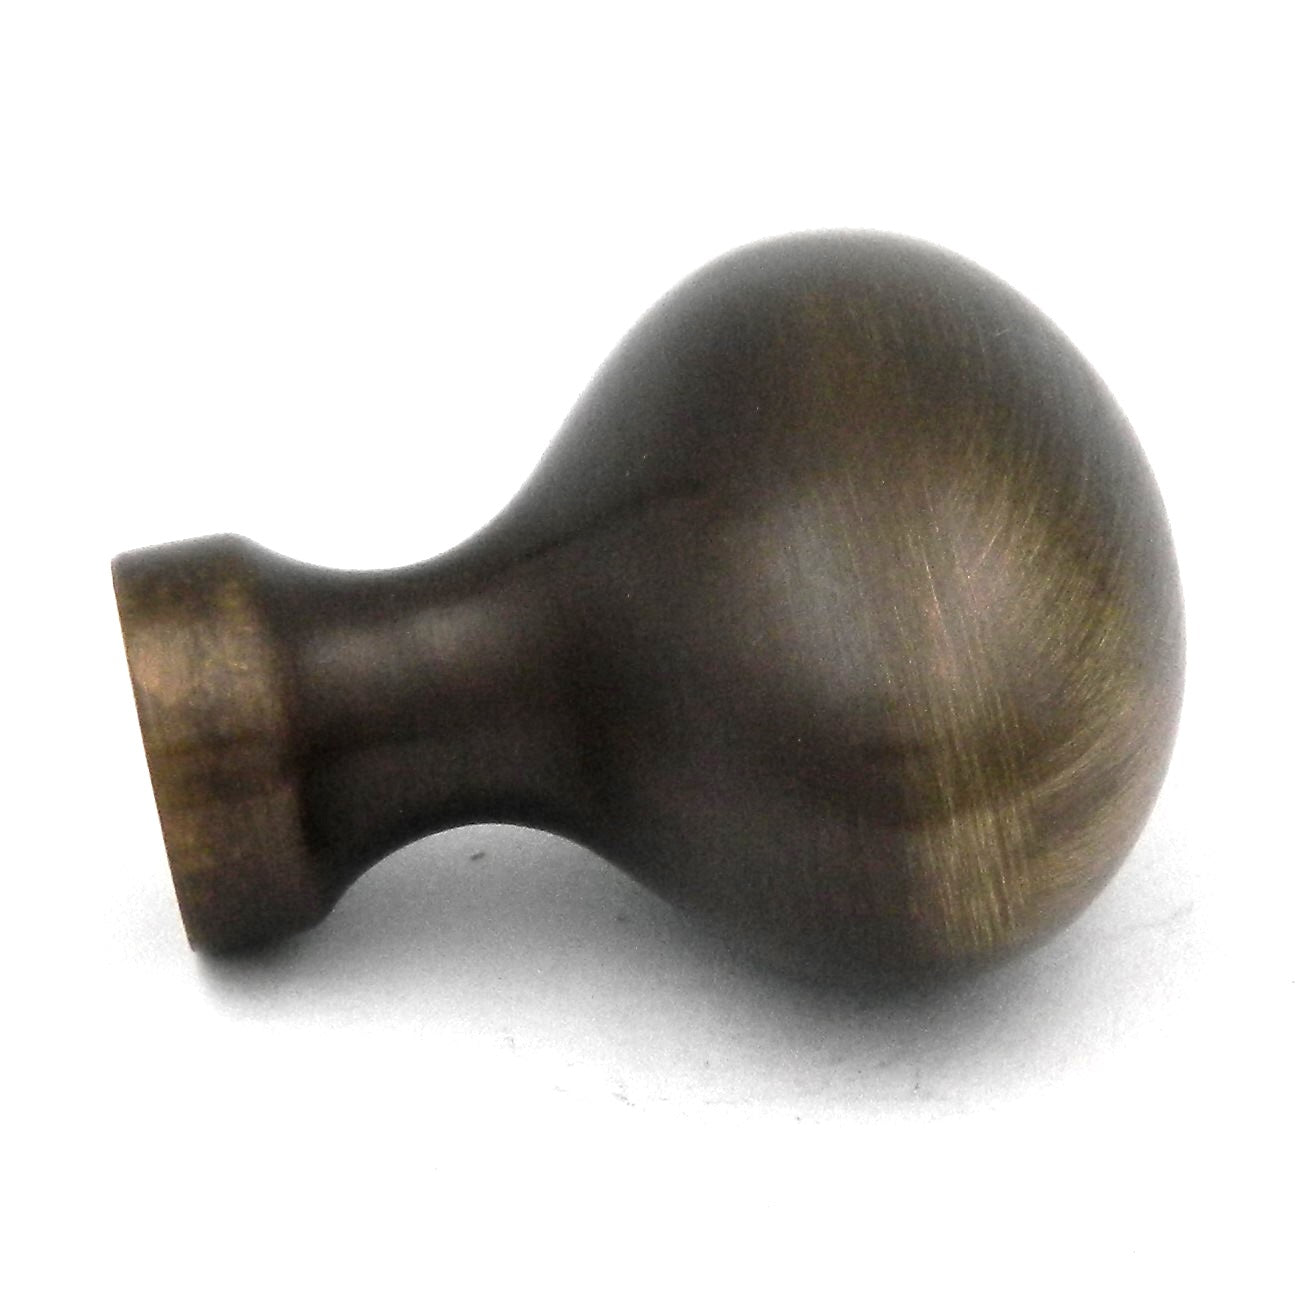 Keeler Power & Beauty Satin Dover Oval 1 3/8" Solid Brass Cabinet Knob P9176-9013